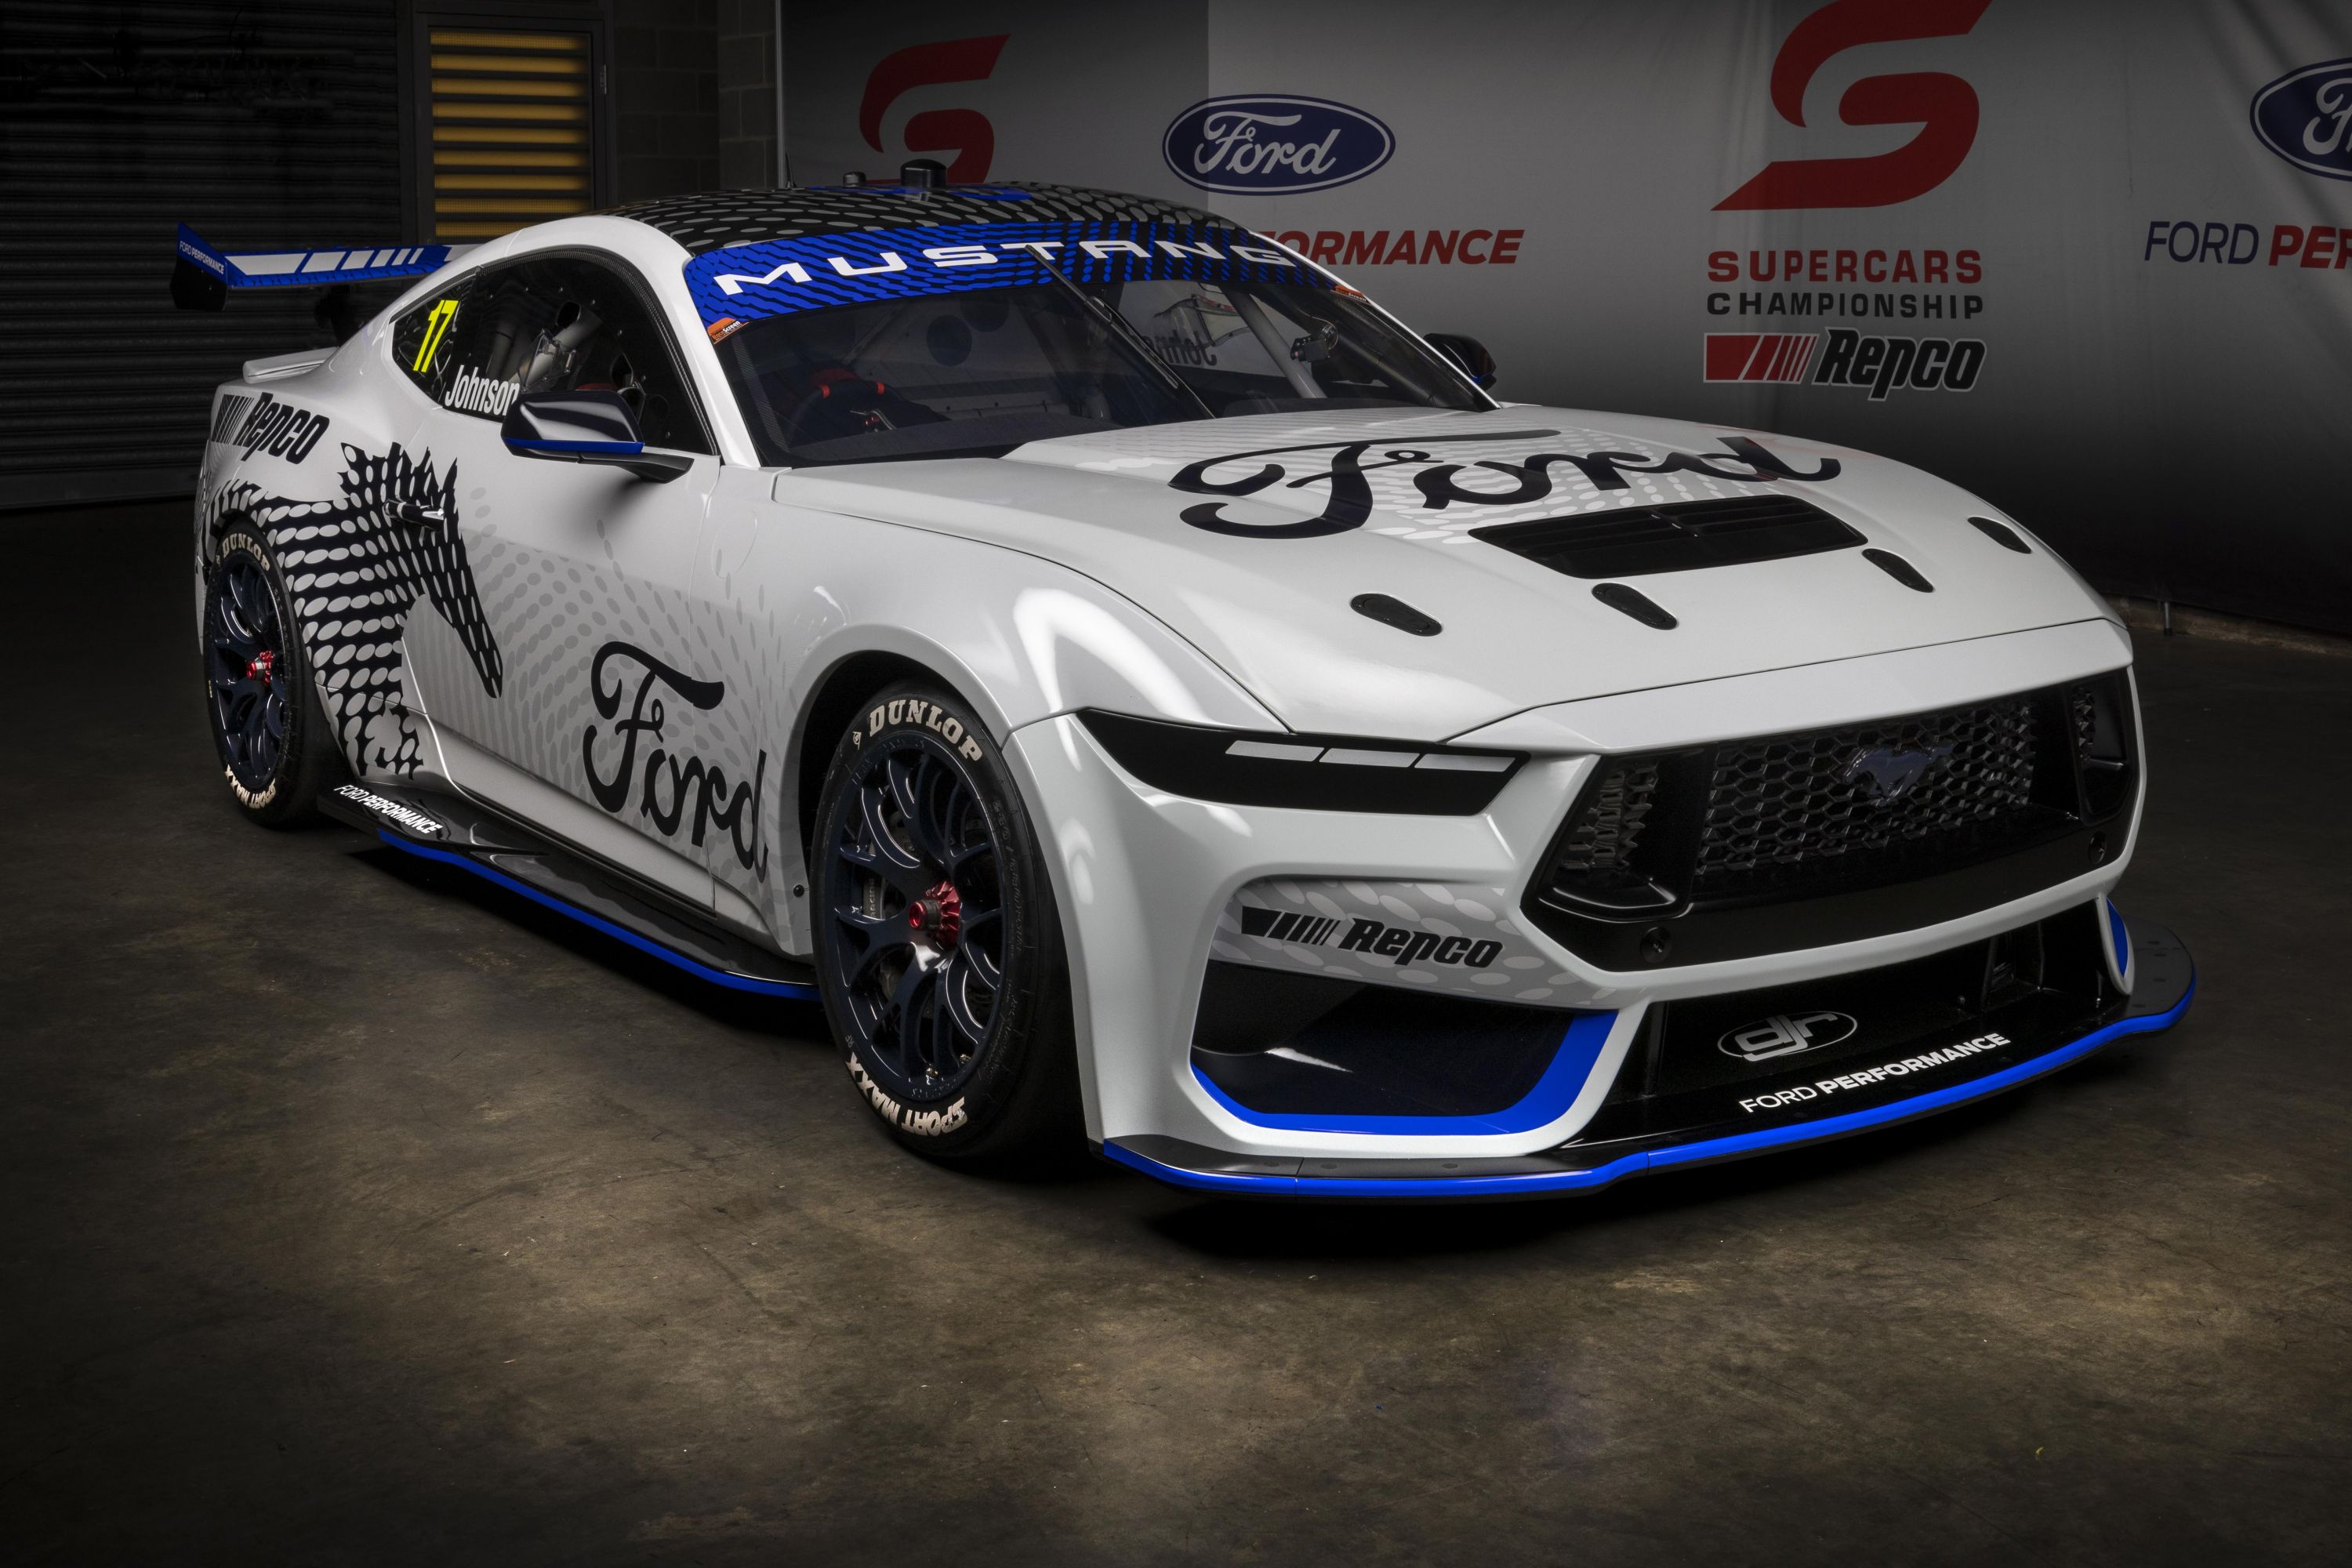 2023 Ford Mustang Supercar Makes Debut At Bathurst Cars For Sale Canberra